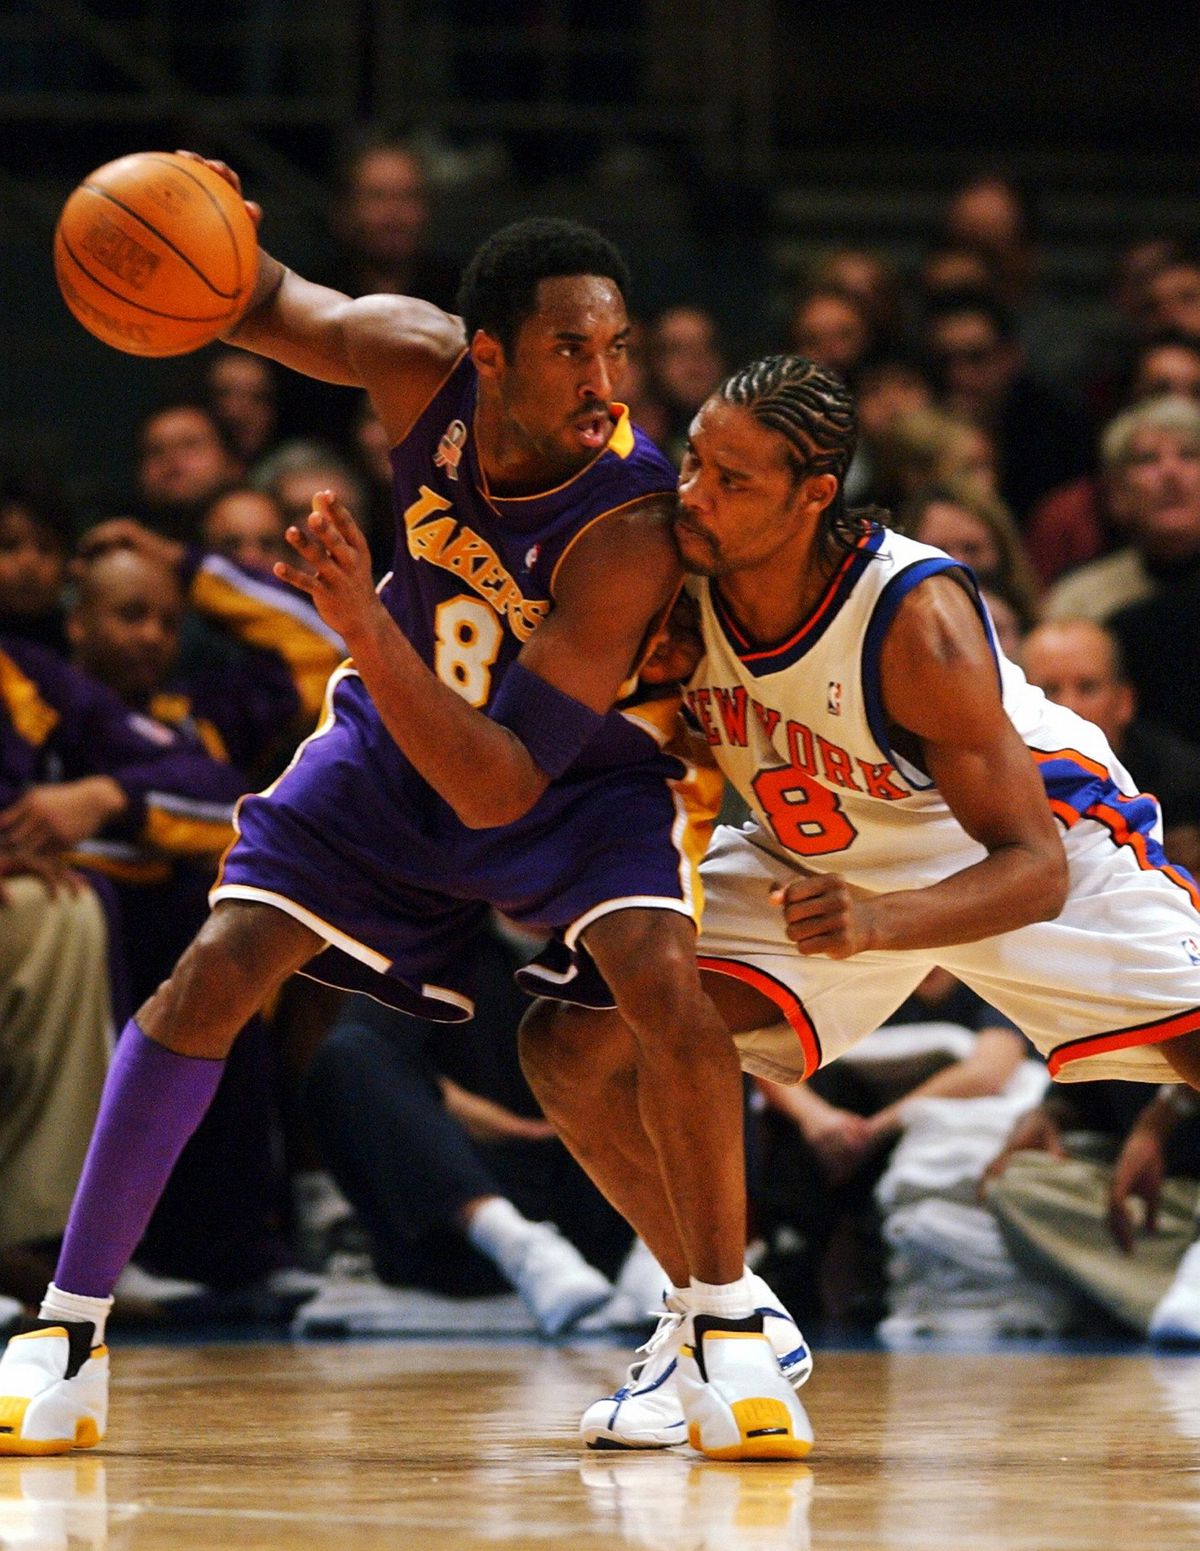 The New York Knicks’ Latrell Sprewell putting some pressure on the Los Angeles Lakers’ Kobe Bryant in 2002